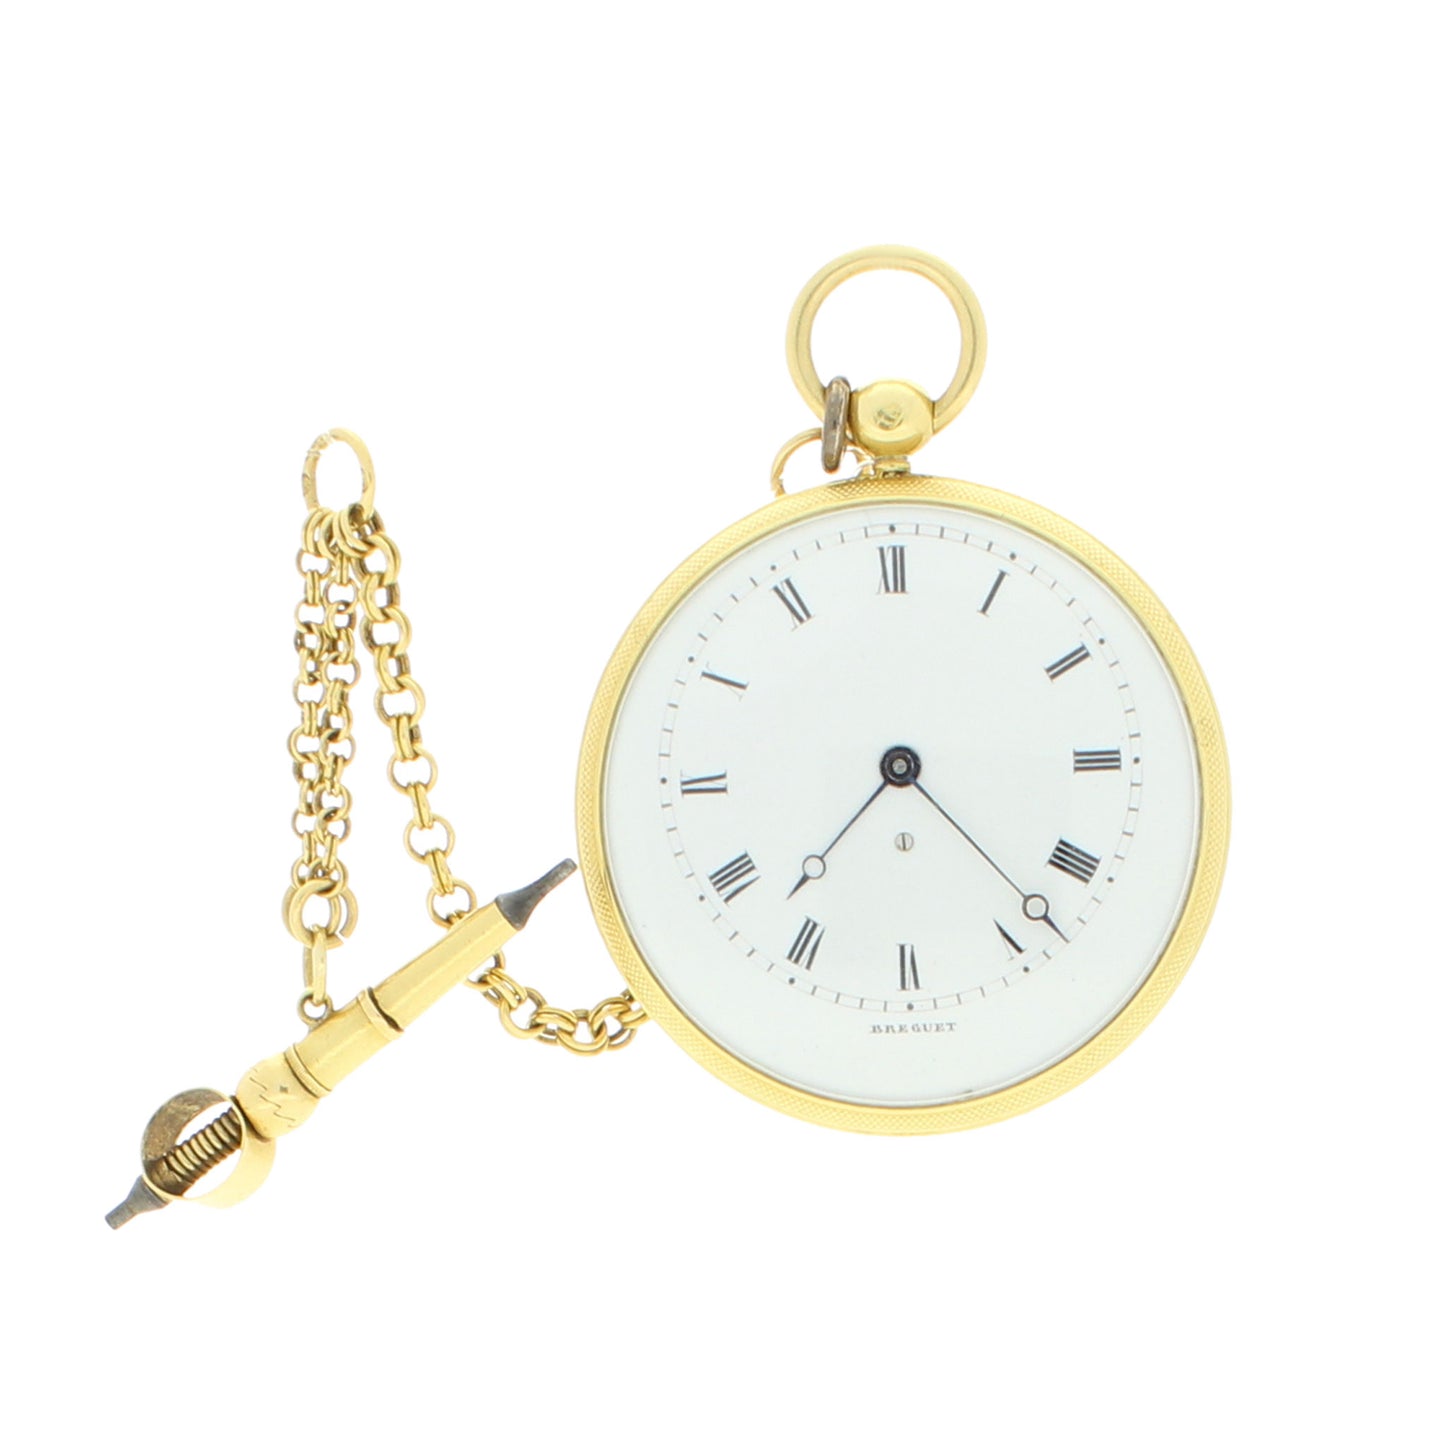 18ct yellow gold miniature open face pocket watch with chain. Made 1840s